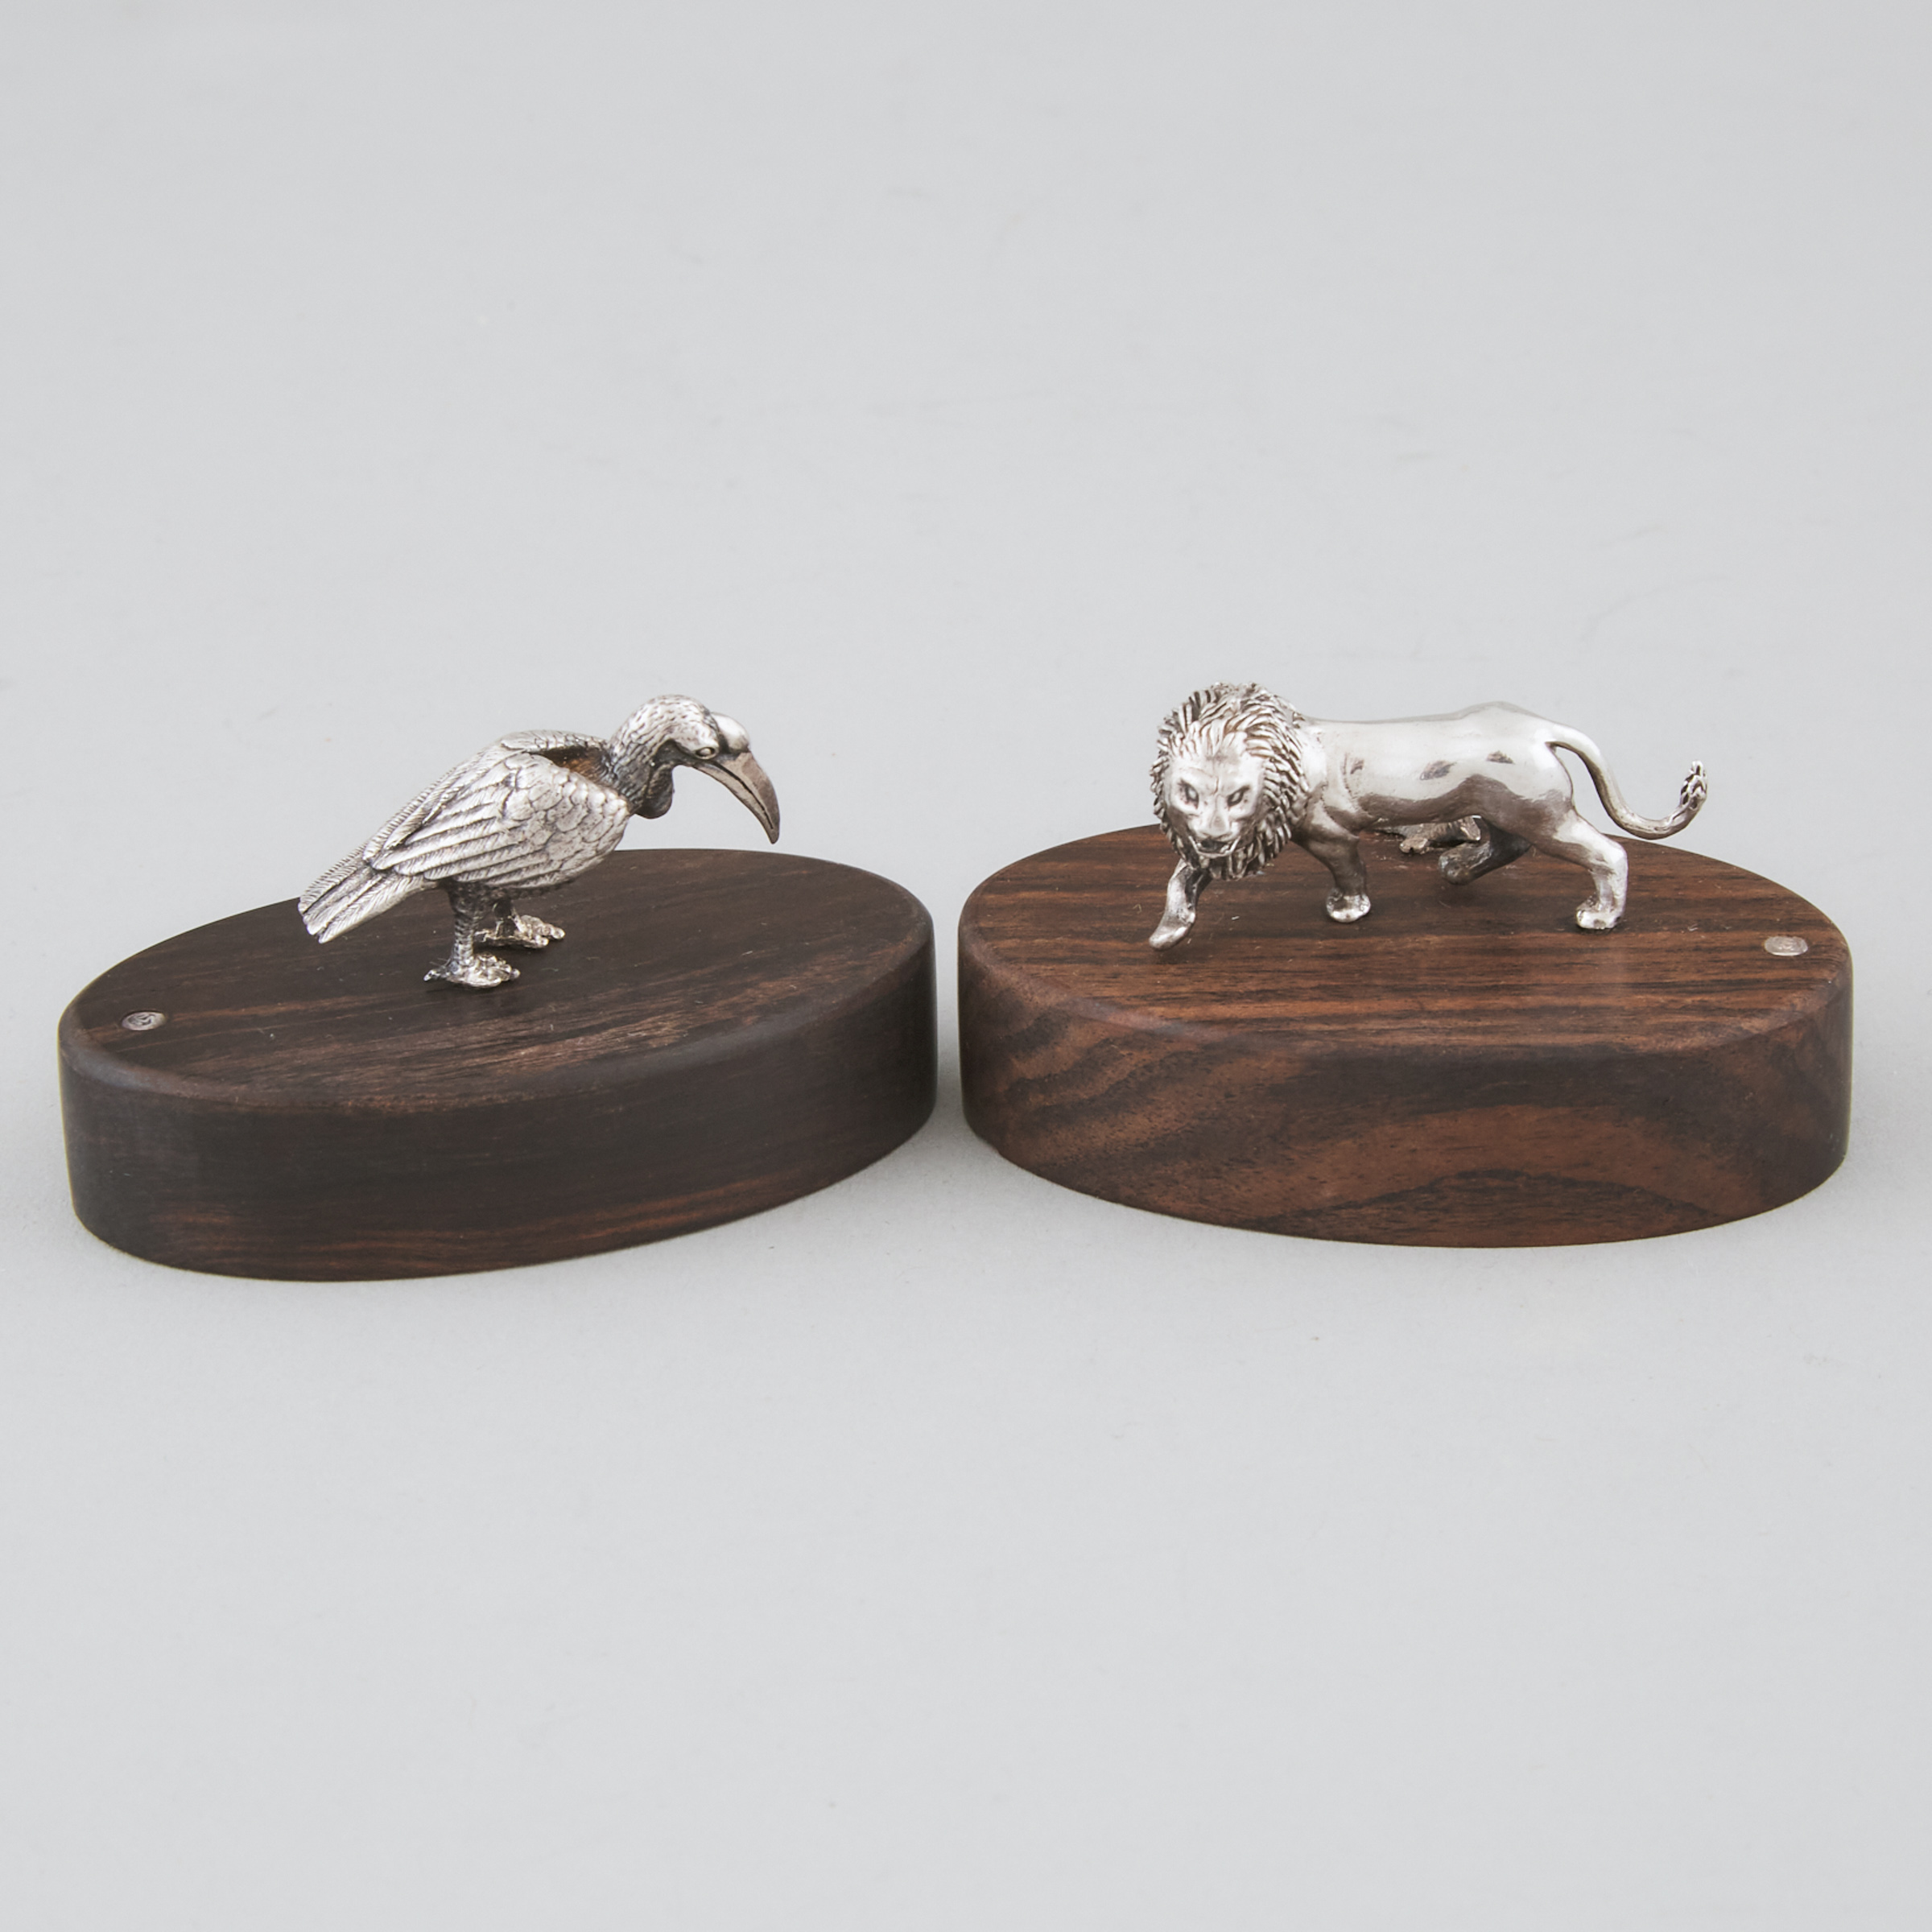 Pair of Zimbabwean Silver 'Lion' or 'Hornbill' Place Card or Menu Holders, Patrick Mavros, Harare, late 20th century